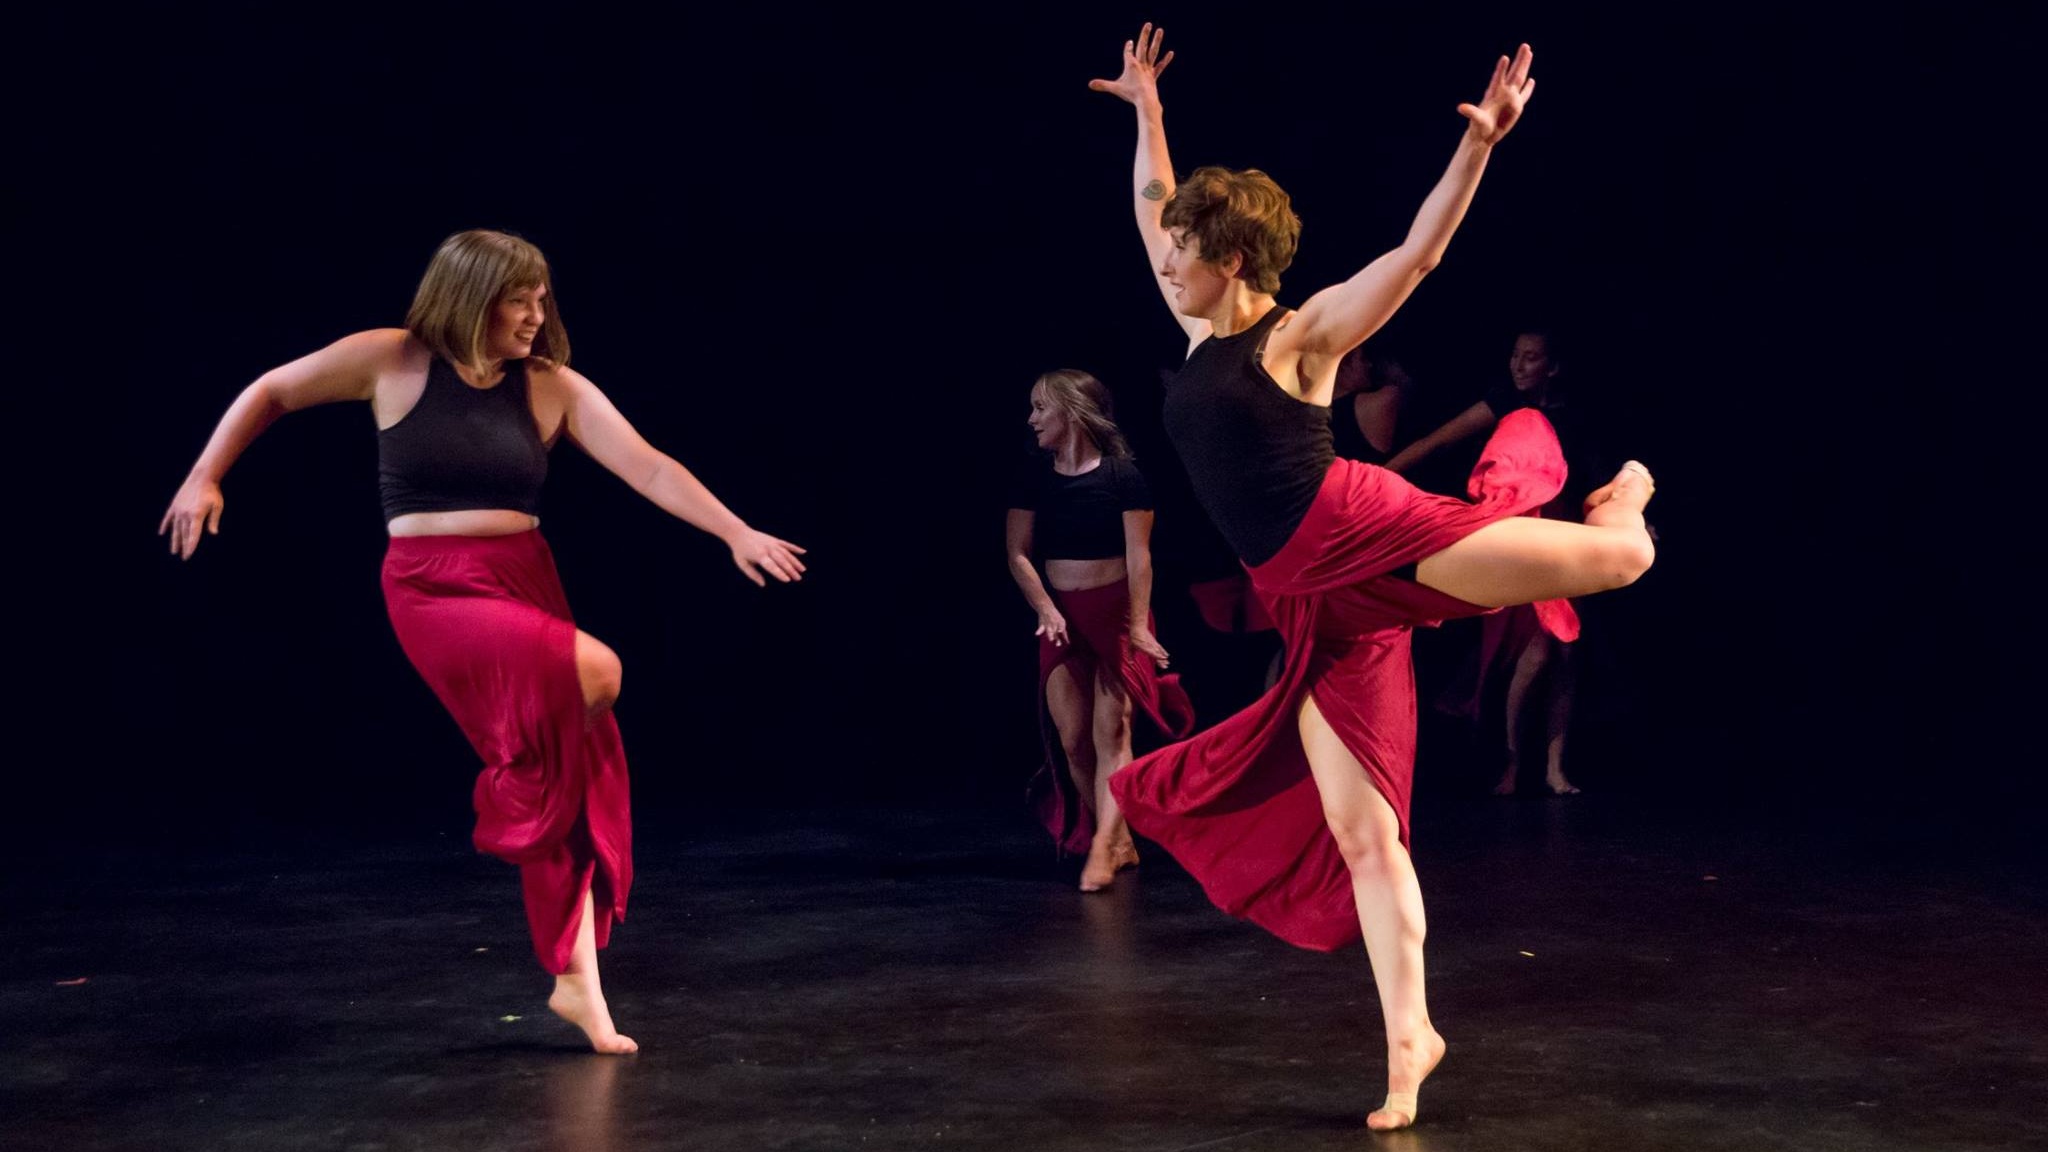  “Hold and Release”- Premiered at  Rhythmically Speaking   Choreographed by Karla Grotting  Aug. 2017  PC  Bill Cameron    